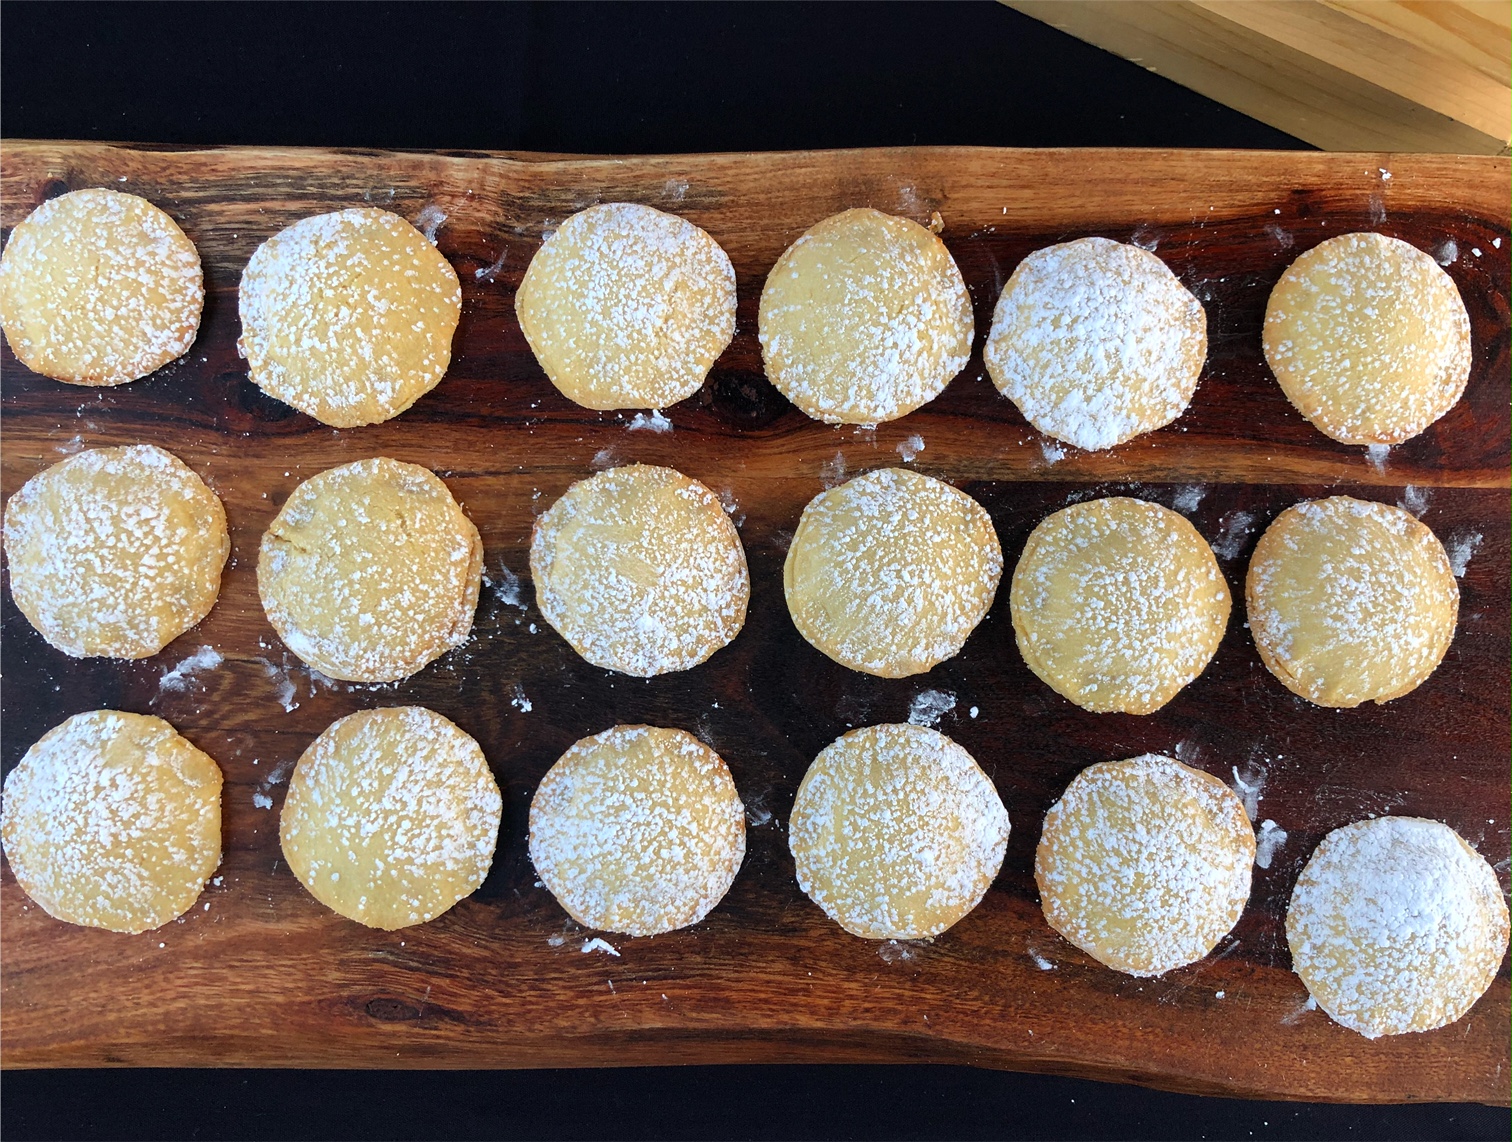 On a dark wooden board, there are lemon cookies dusted with powdered sugar. Photo by Alyssa Buckley.